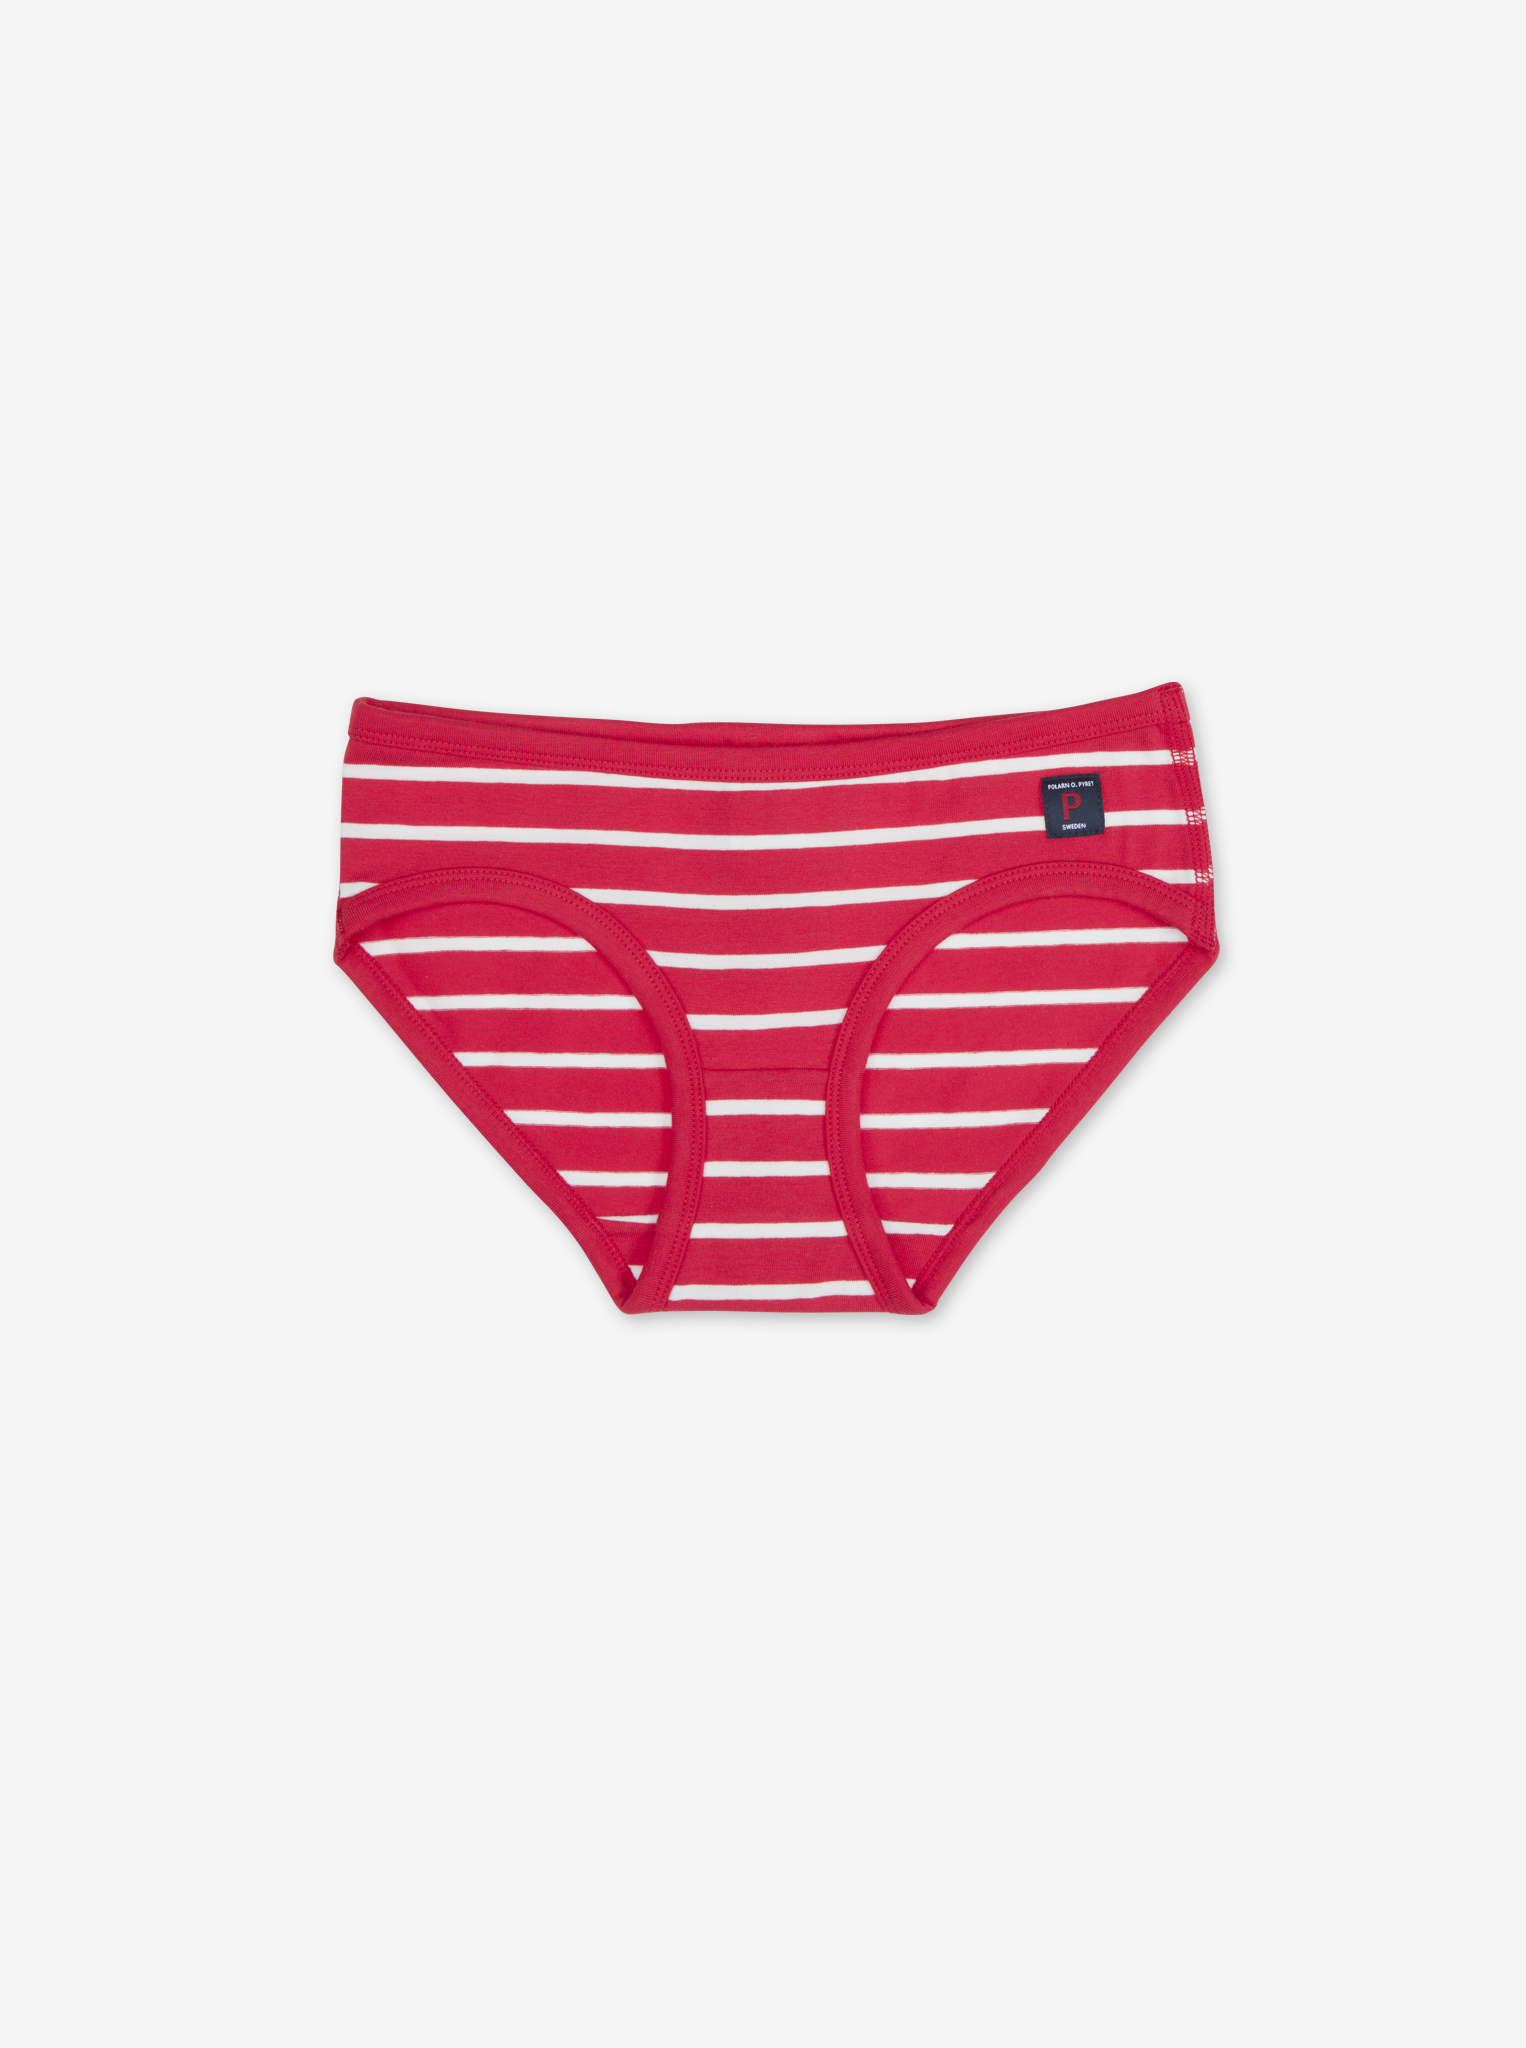 girls pants briefs red and white stripe, organic cotton comfortable, polarn o. pyret quality 